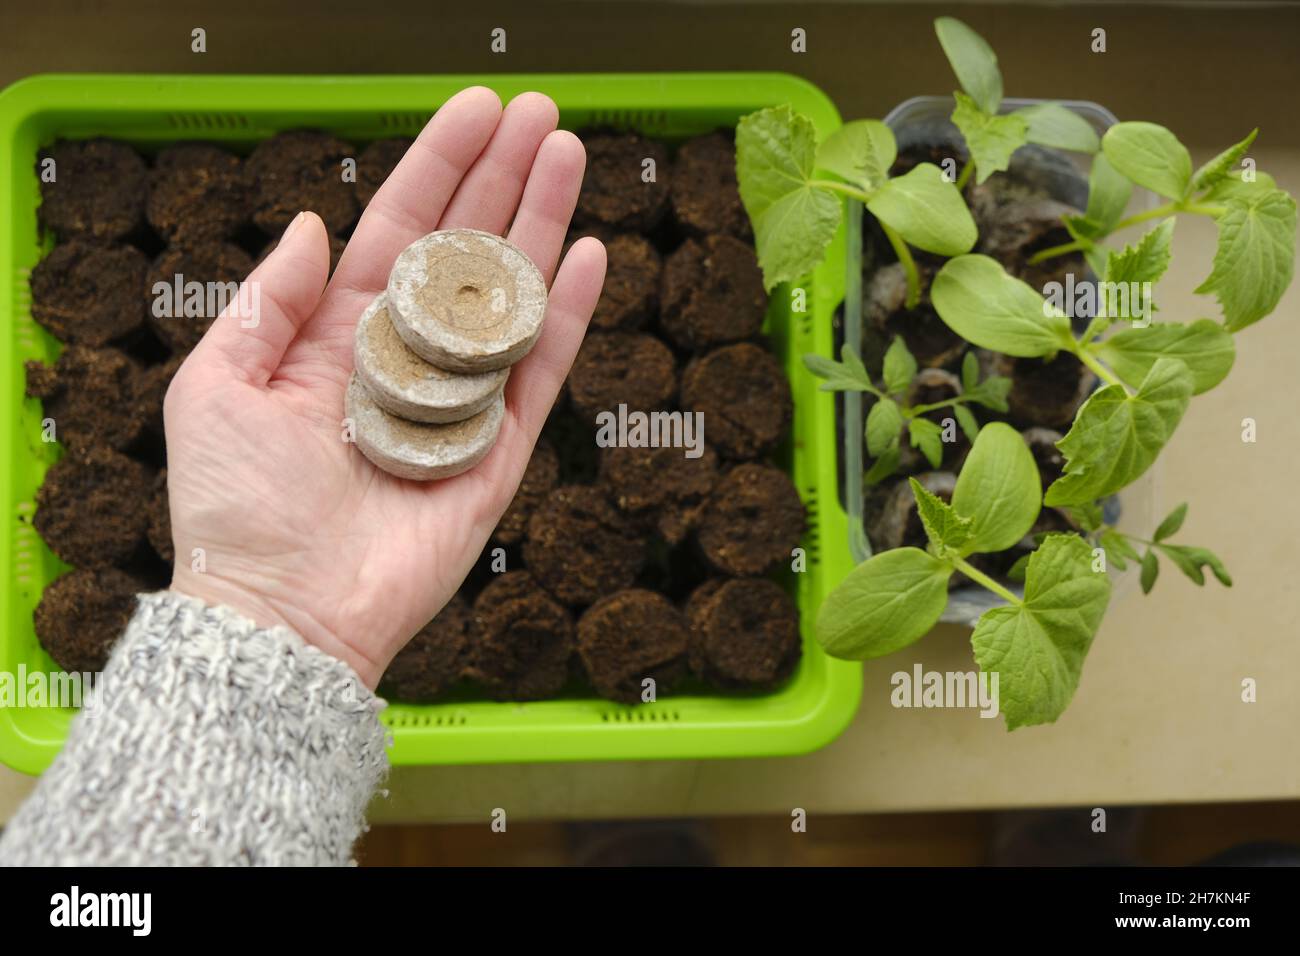 Peat tablets for seedlings. Planting organic material.Sowing seeds.Growing seedlings. Peat tablets in a hand on a seedling green tray background.plant Stock Photo